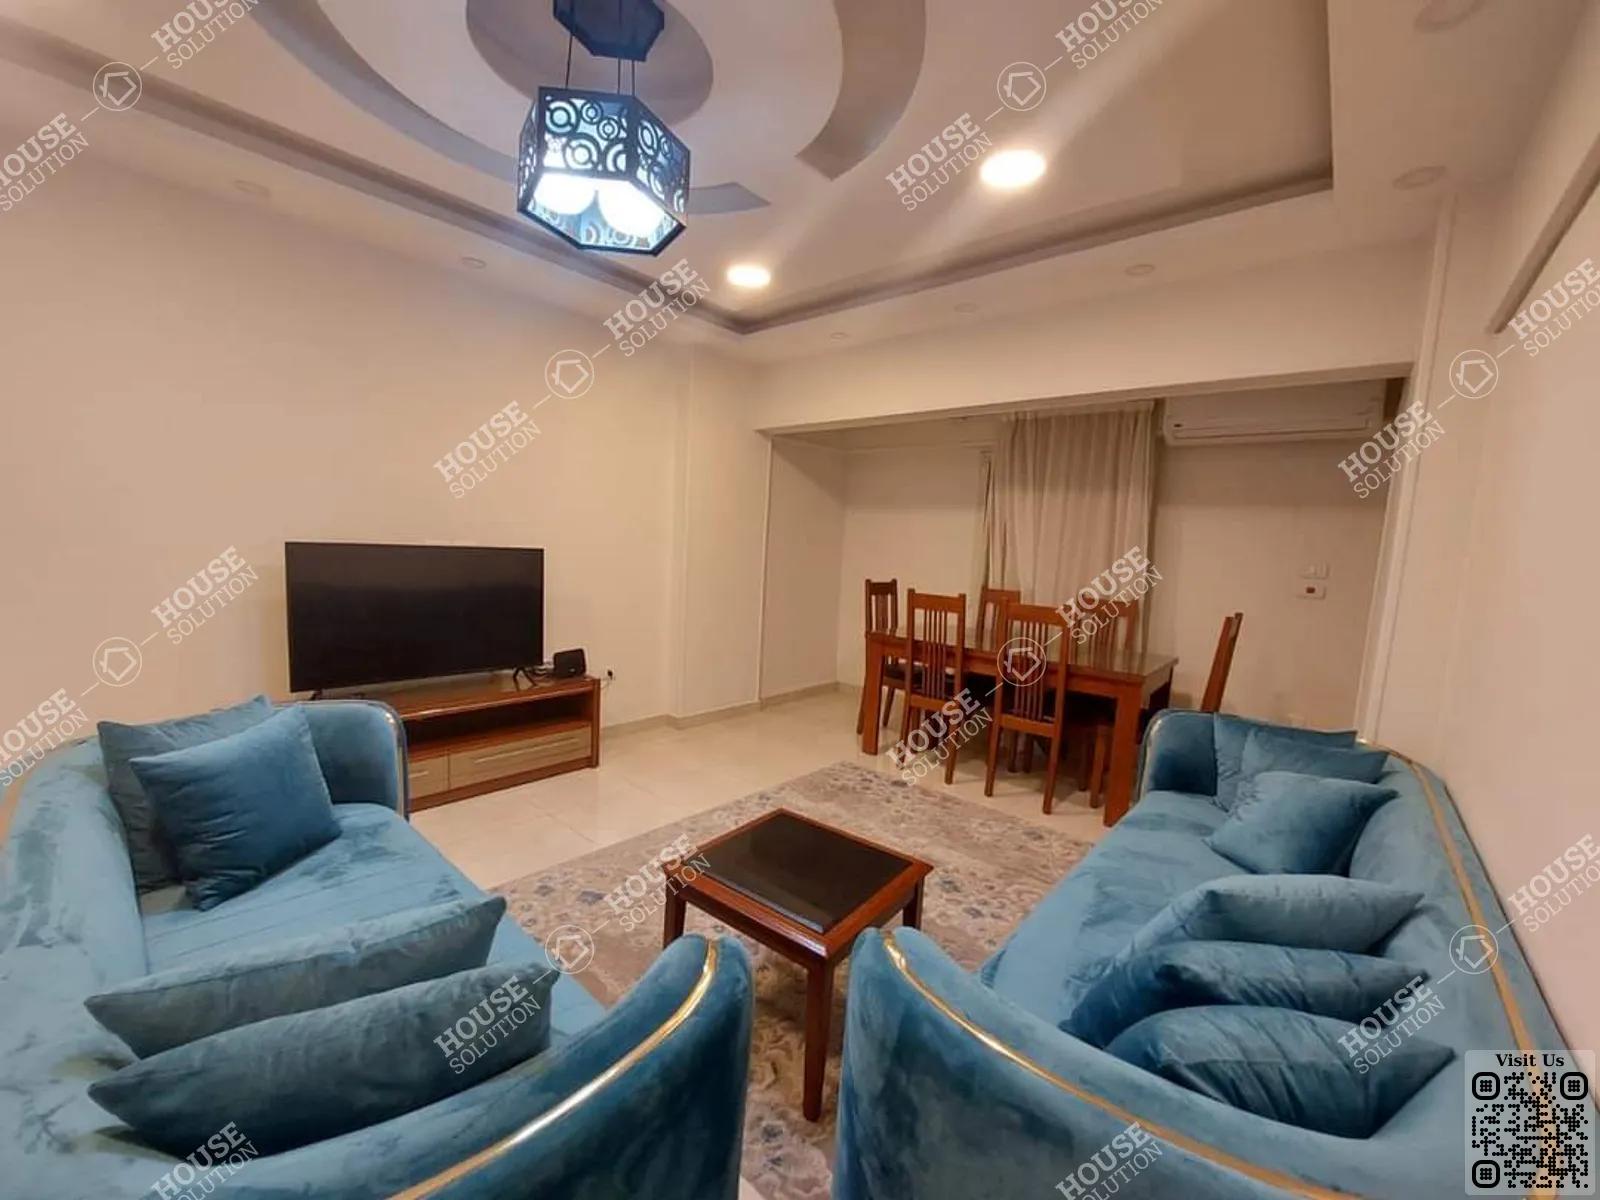 RECEPTION  @ Apartments For Rent In Maadi Maadi Degla Area: 100 m² consists of 2 Bedrooms 2 Bathrooms Modern furnished 5 stars #5375-2